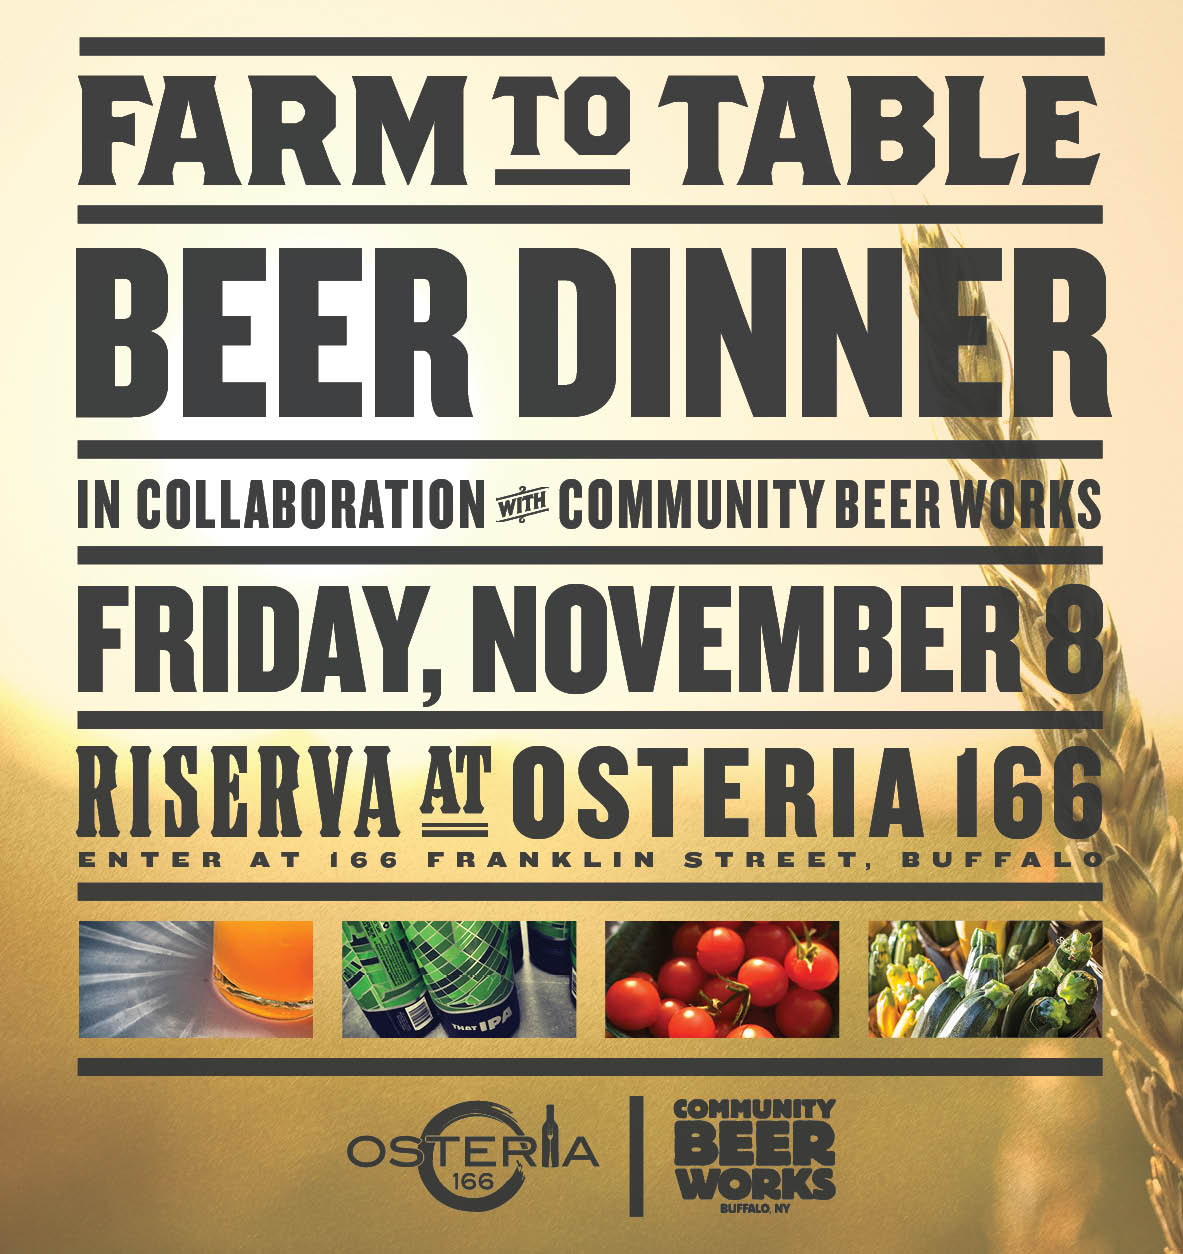 Farm-To-Table Beer Dinner with Community Beer Works